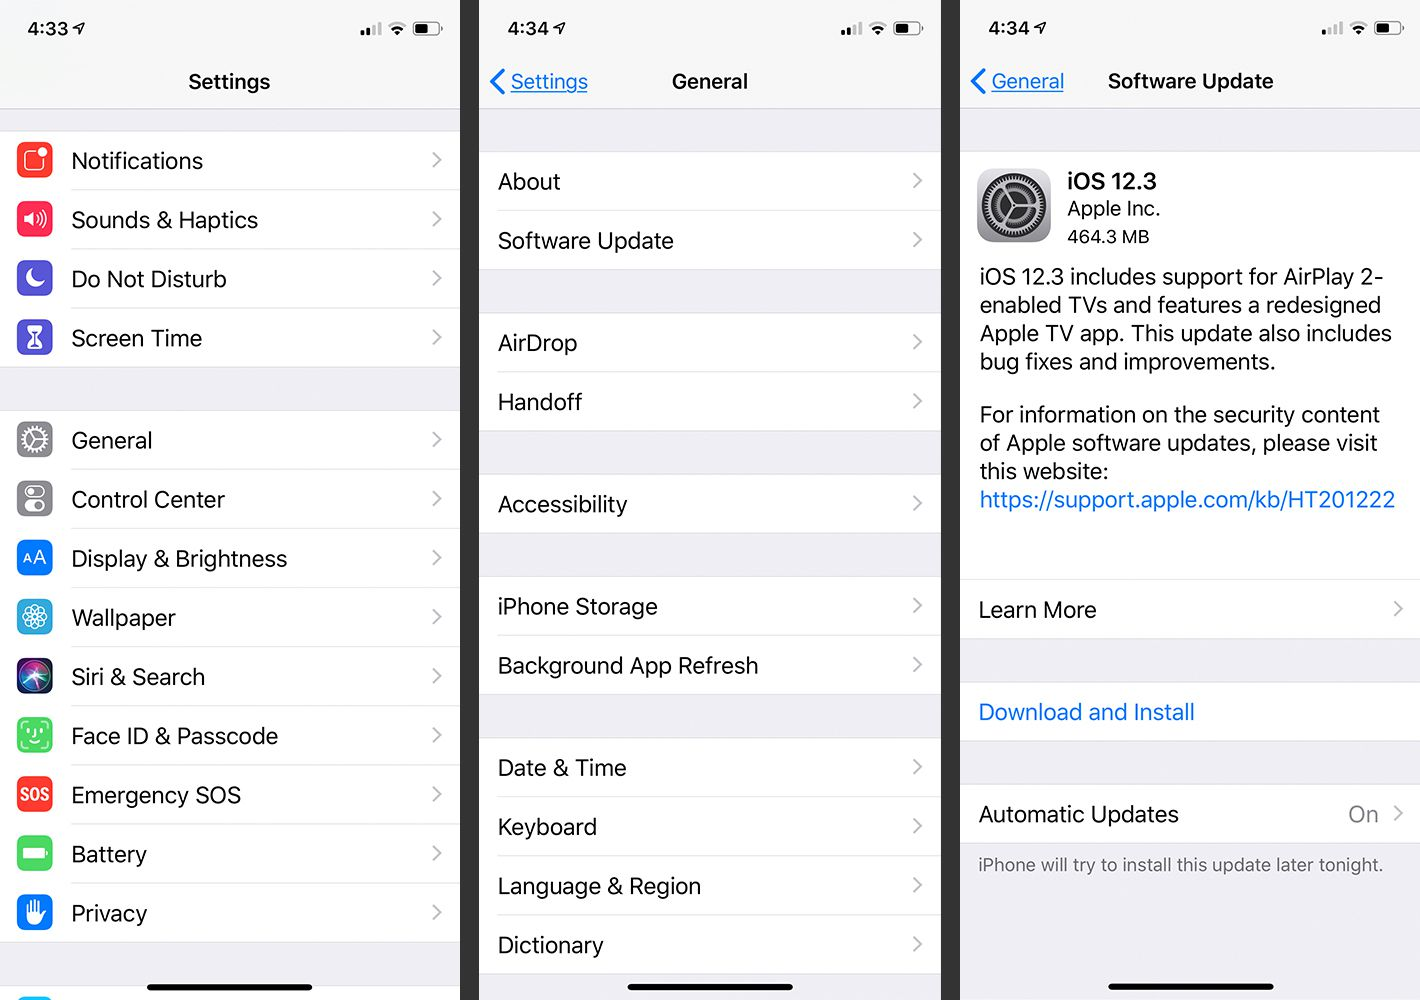 Update iOS System Software